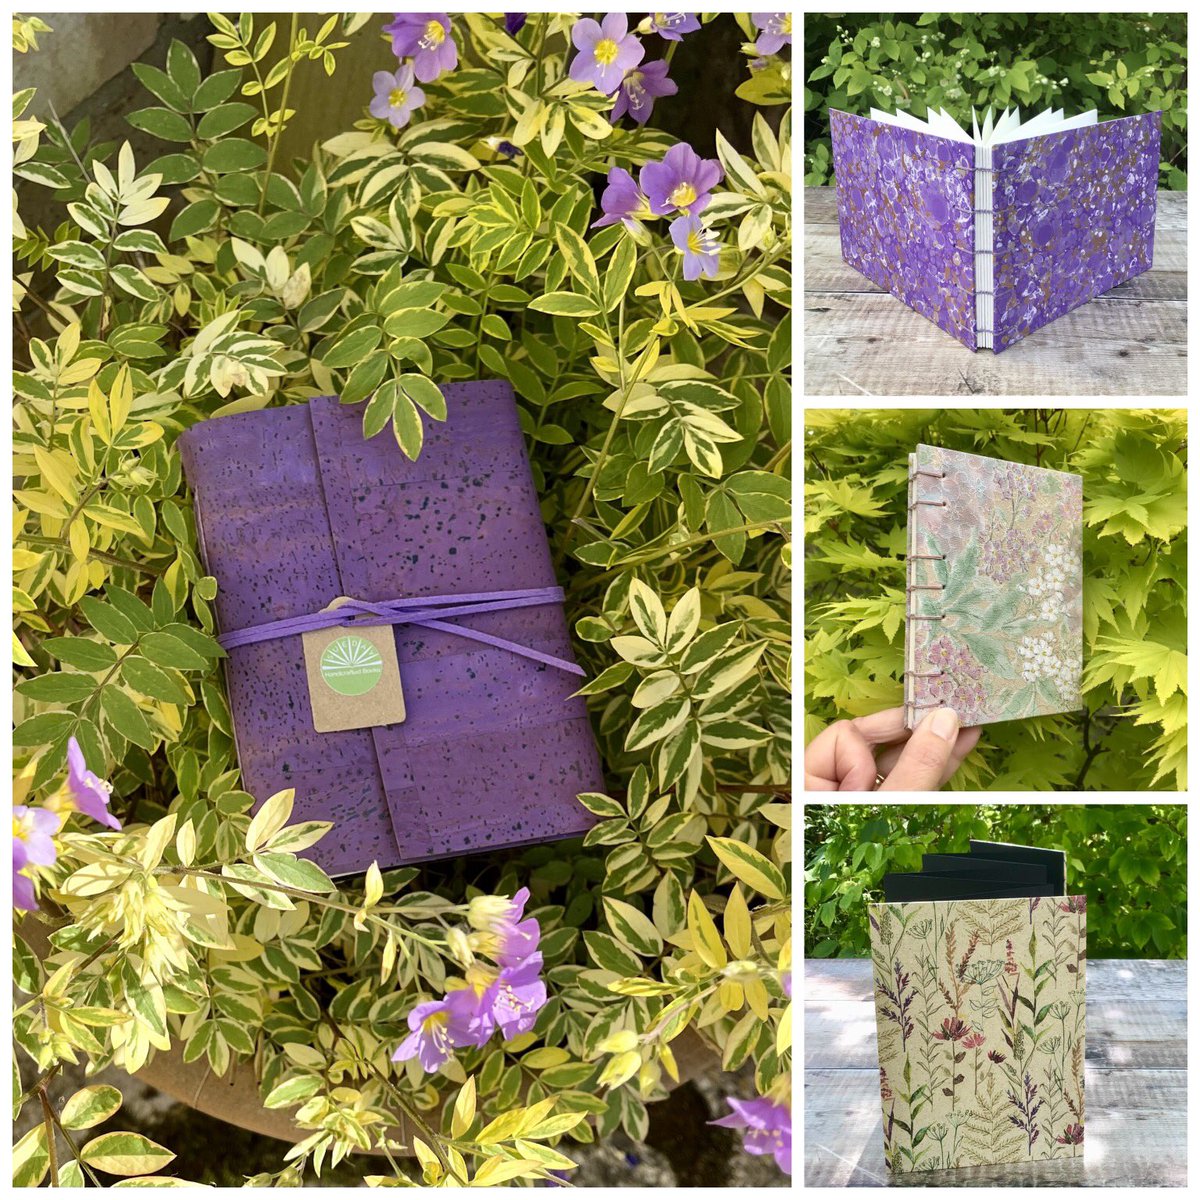 Always fun to have a garden photoshoot! 💜💗💚 My journals, sketchbooks and photo albums love be used in the wild as well as indoors. Take them travelling! #UKGiftHour #UKGiftAM #ShopIndie #GiftIdeas #SaturdayMorning 📚 folksy.com/shops/handcraf… 📚 etsy.com/uk/shop/Crafte…